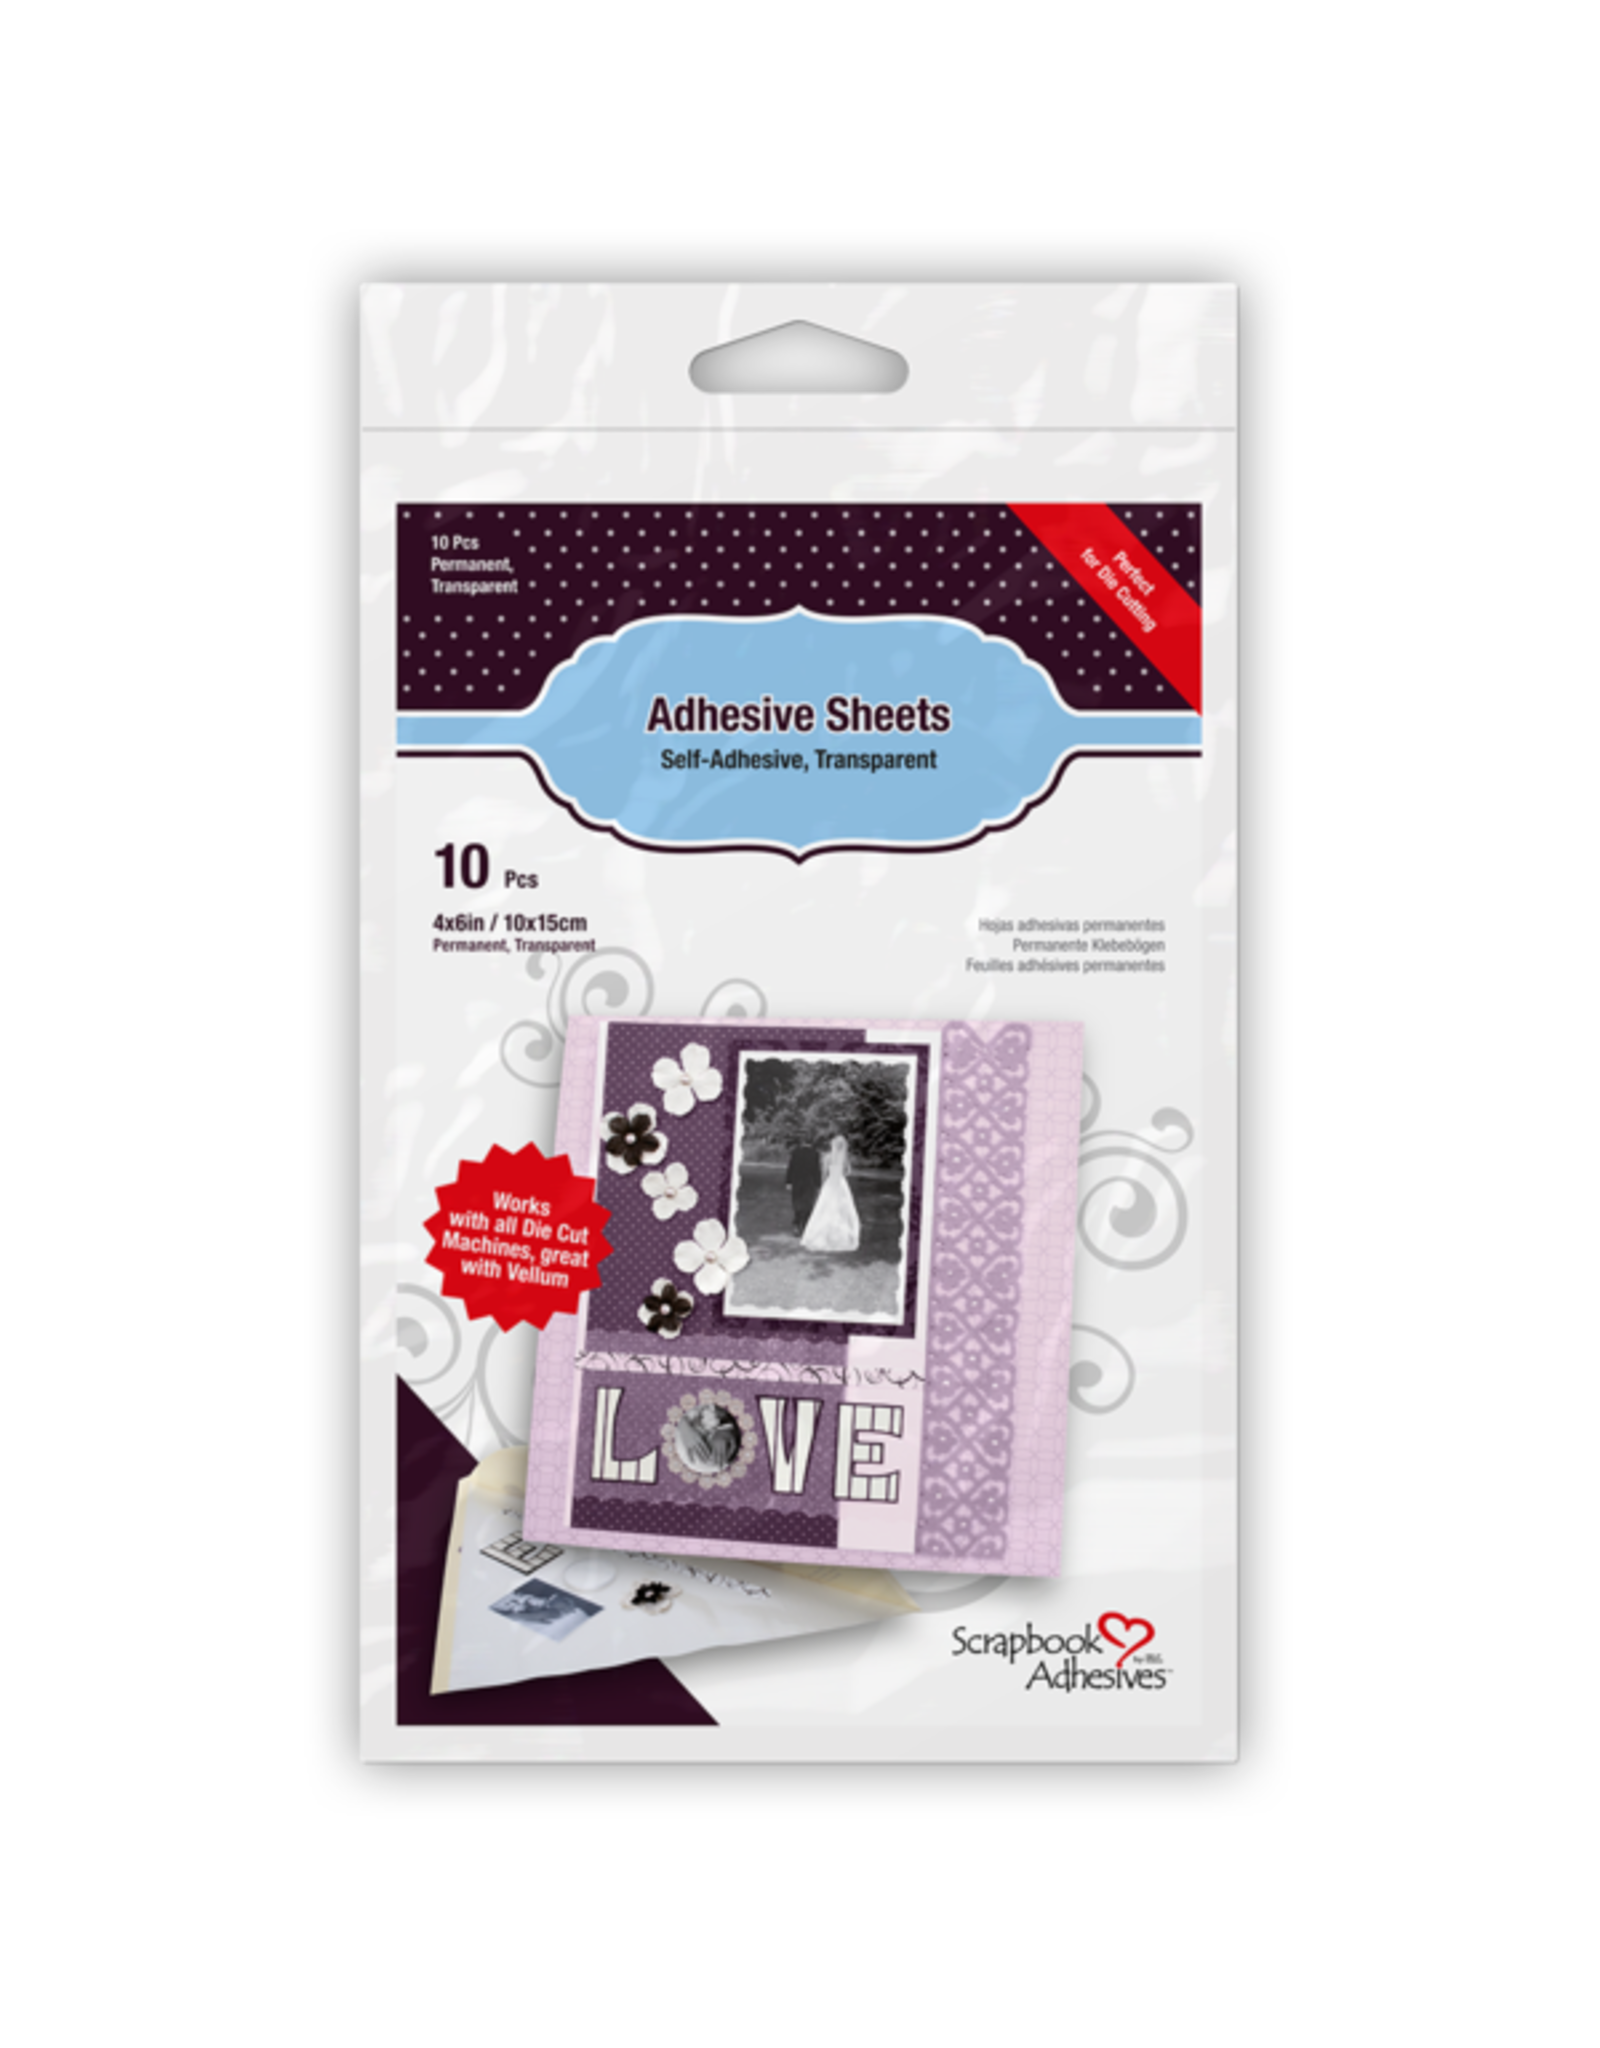 Scrapbook Adhesives Adhesive Sheets- Transparent- Double Sided 4x6